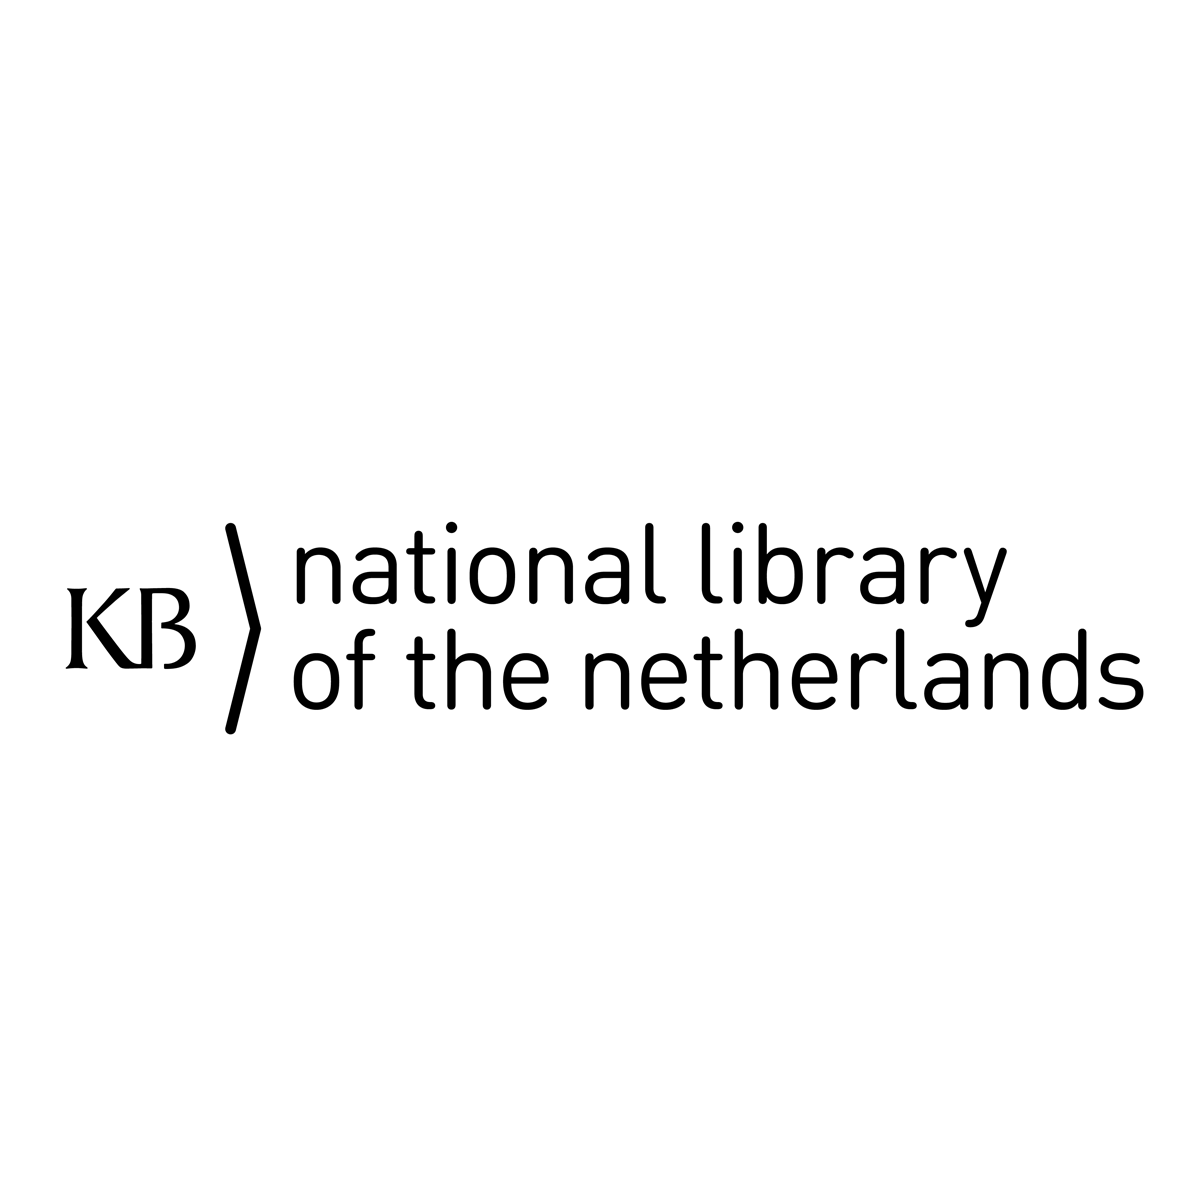 National Library of the Netherlands